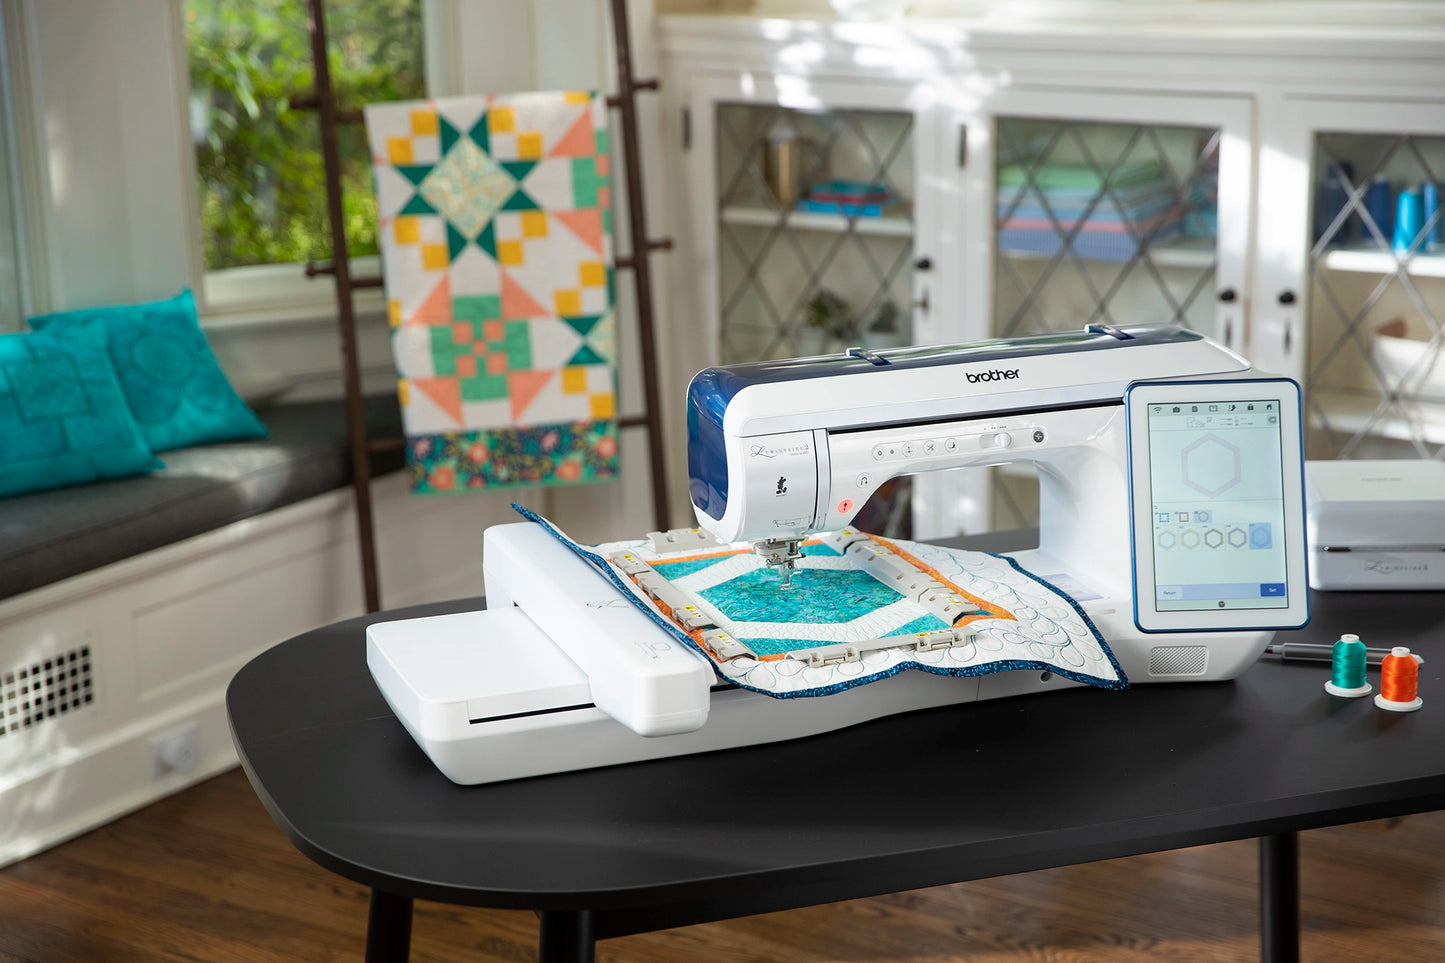 Brother Luminaire 2 Innov-ís XP2 Sewing, Quilting & Embroidery Machine